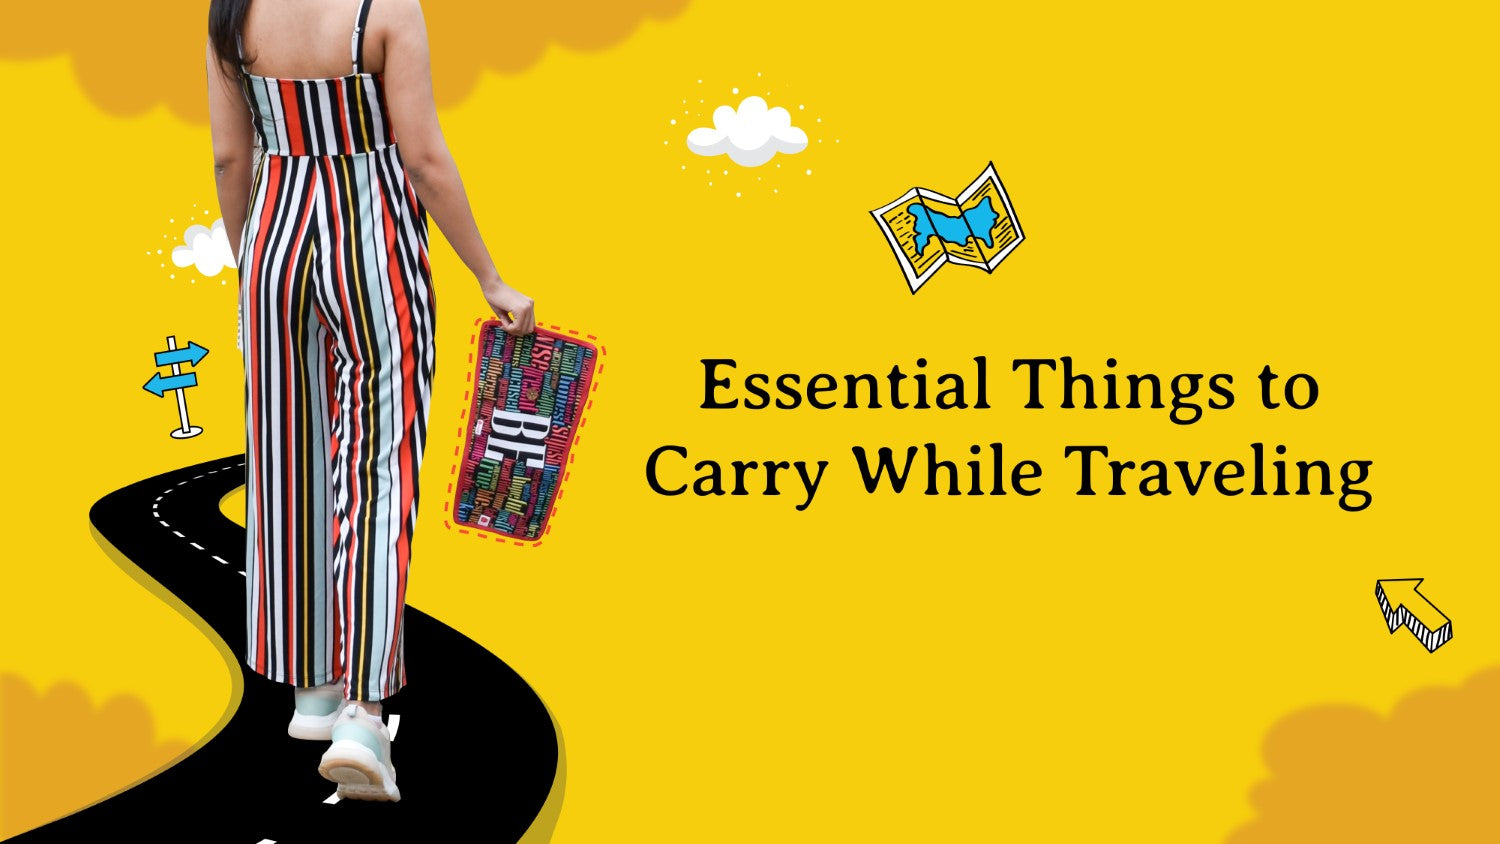 10 Cool & Essential Things to Carry While Traveling